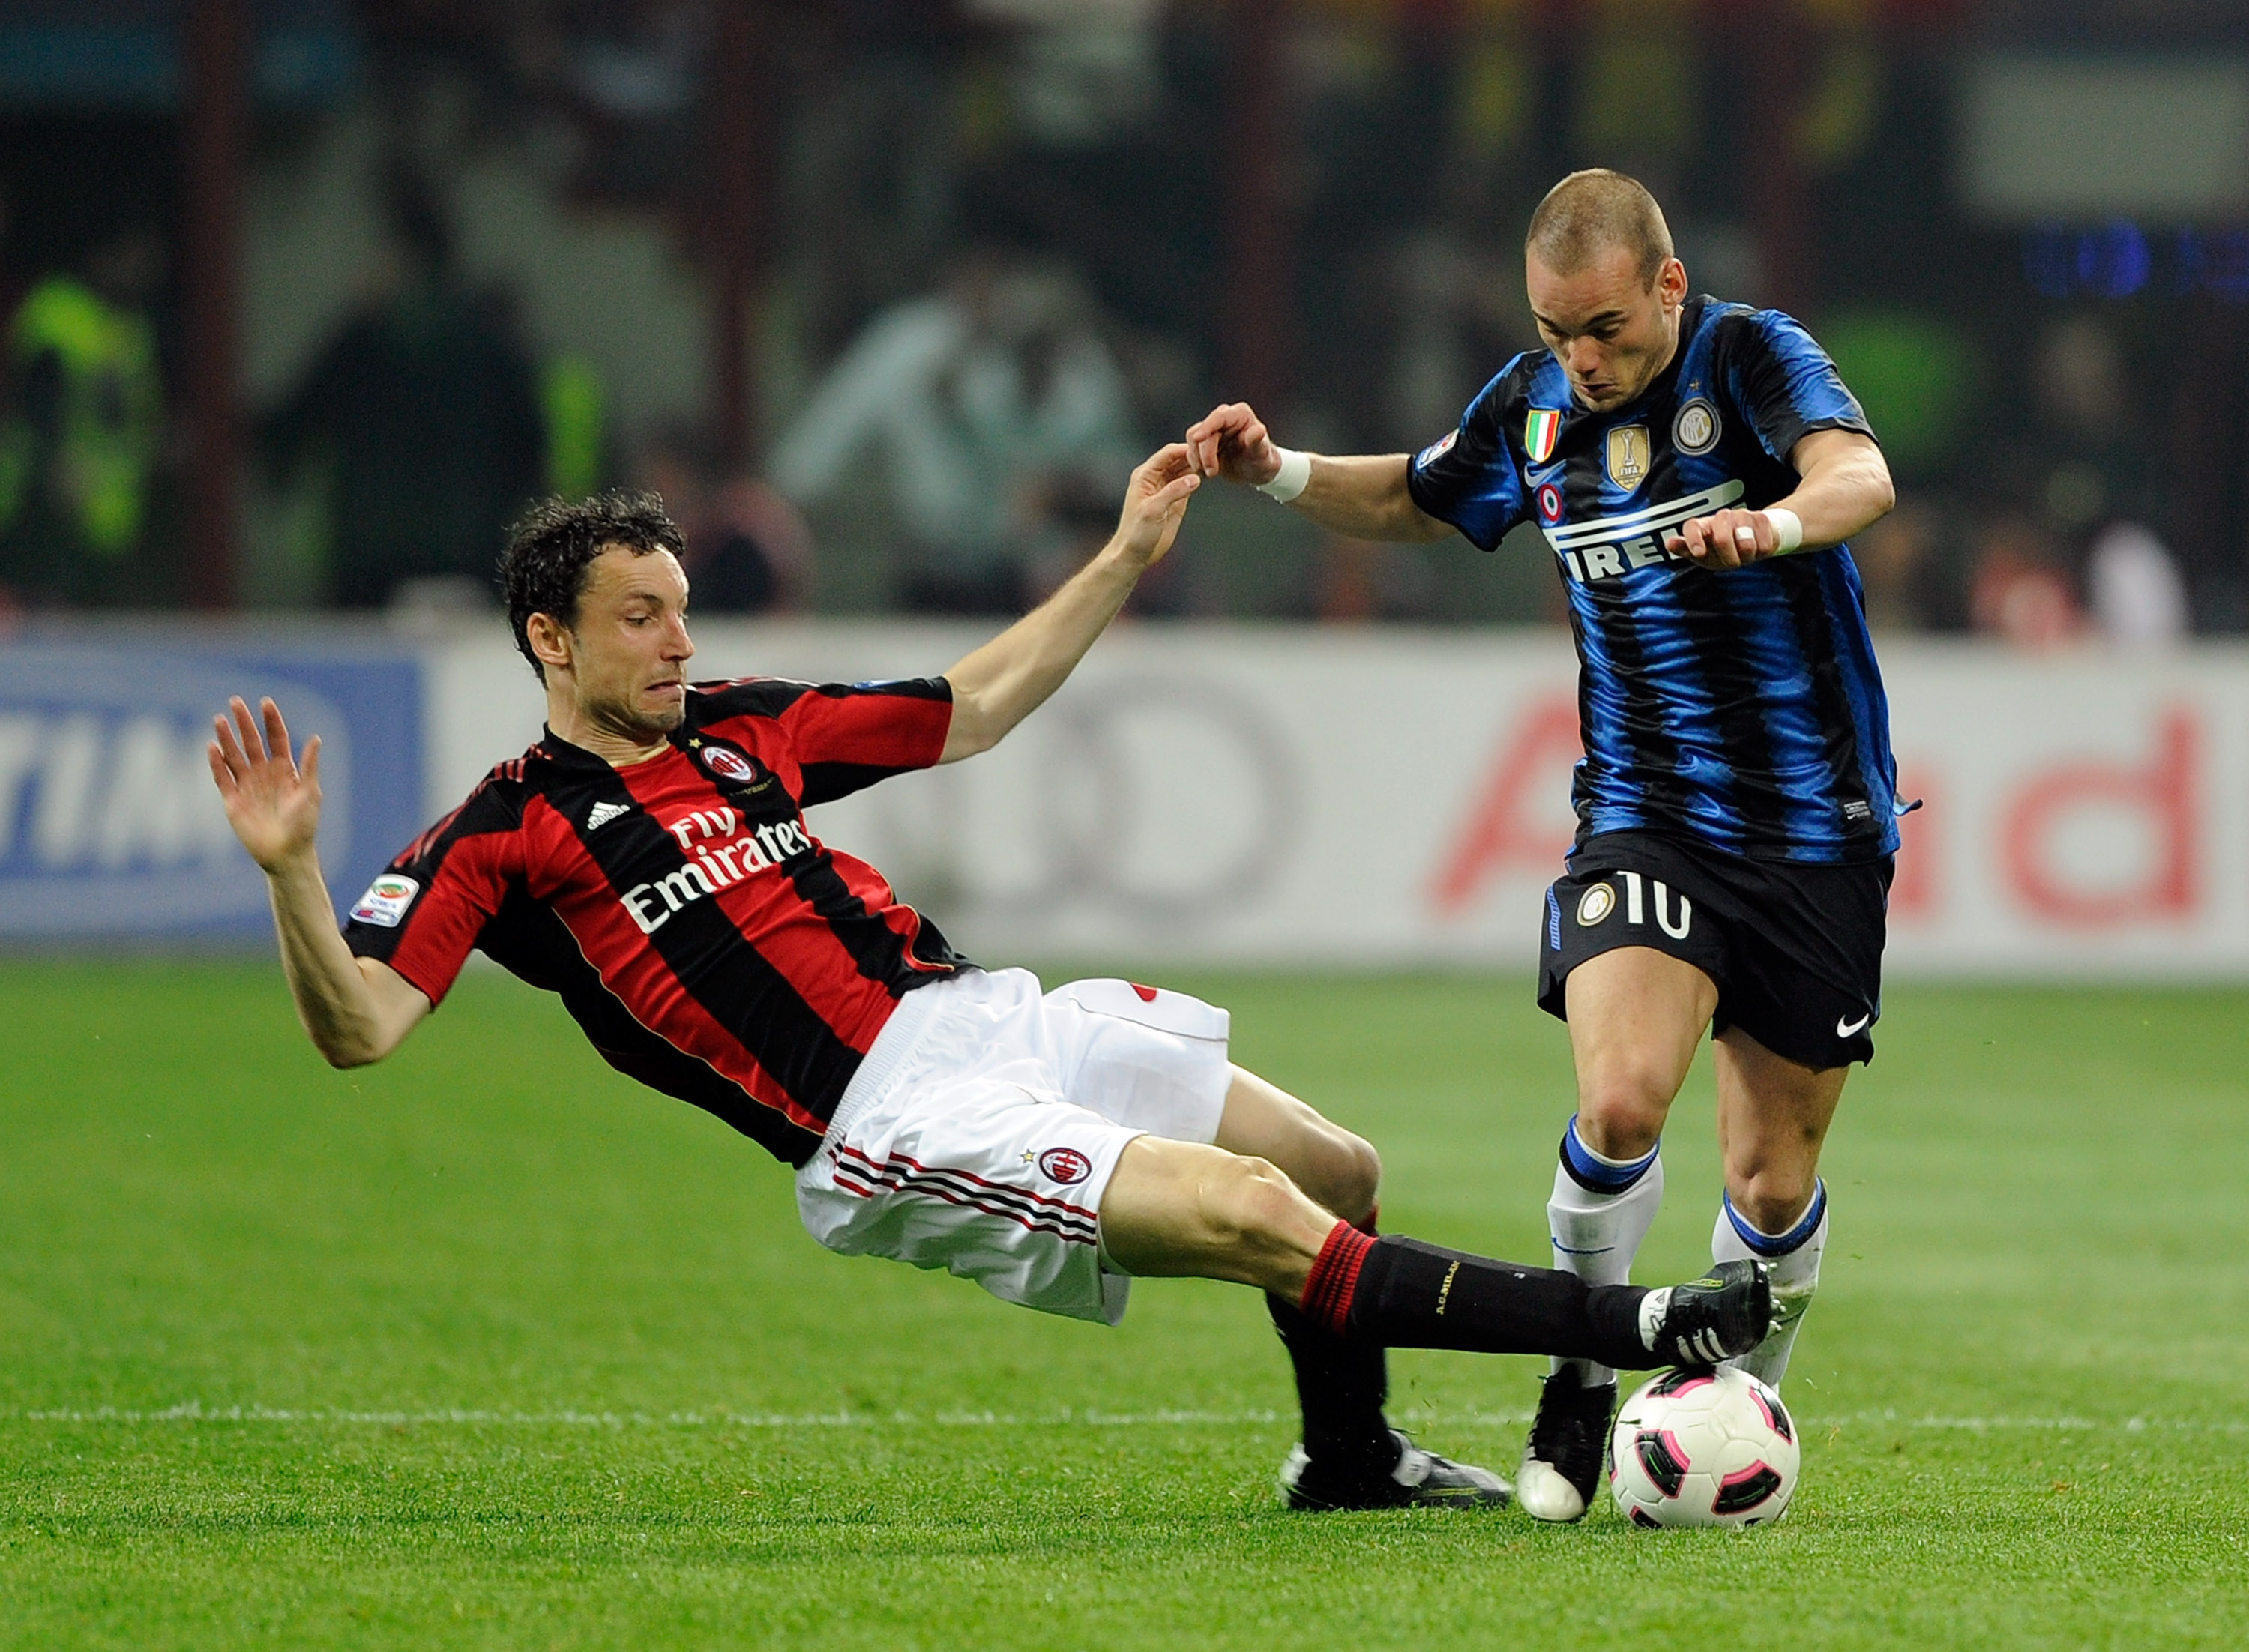 MILAN, ITALY - APRIL 02:  Wesley Sneijder of FC Inter Milan and Mark Van Bommel of AC Milan during the Serie A match between AC Milan and FC Internazionale Milano at Stadio Giuseppe Meazza on April 2, 2011 in Milan, Italy.  (Photo by Claudio Villa/Getty I